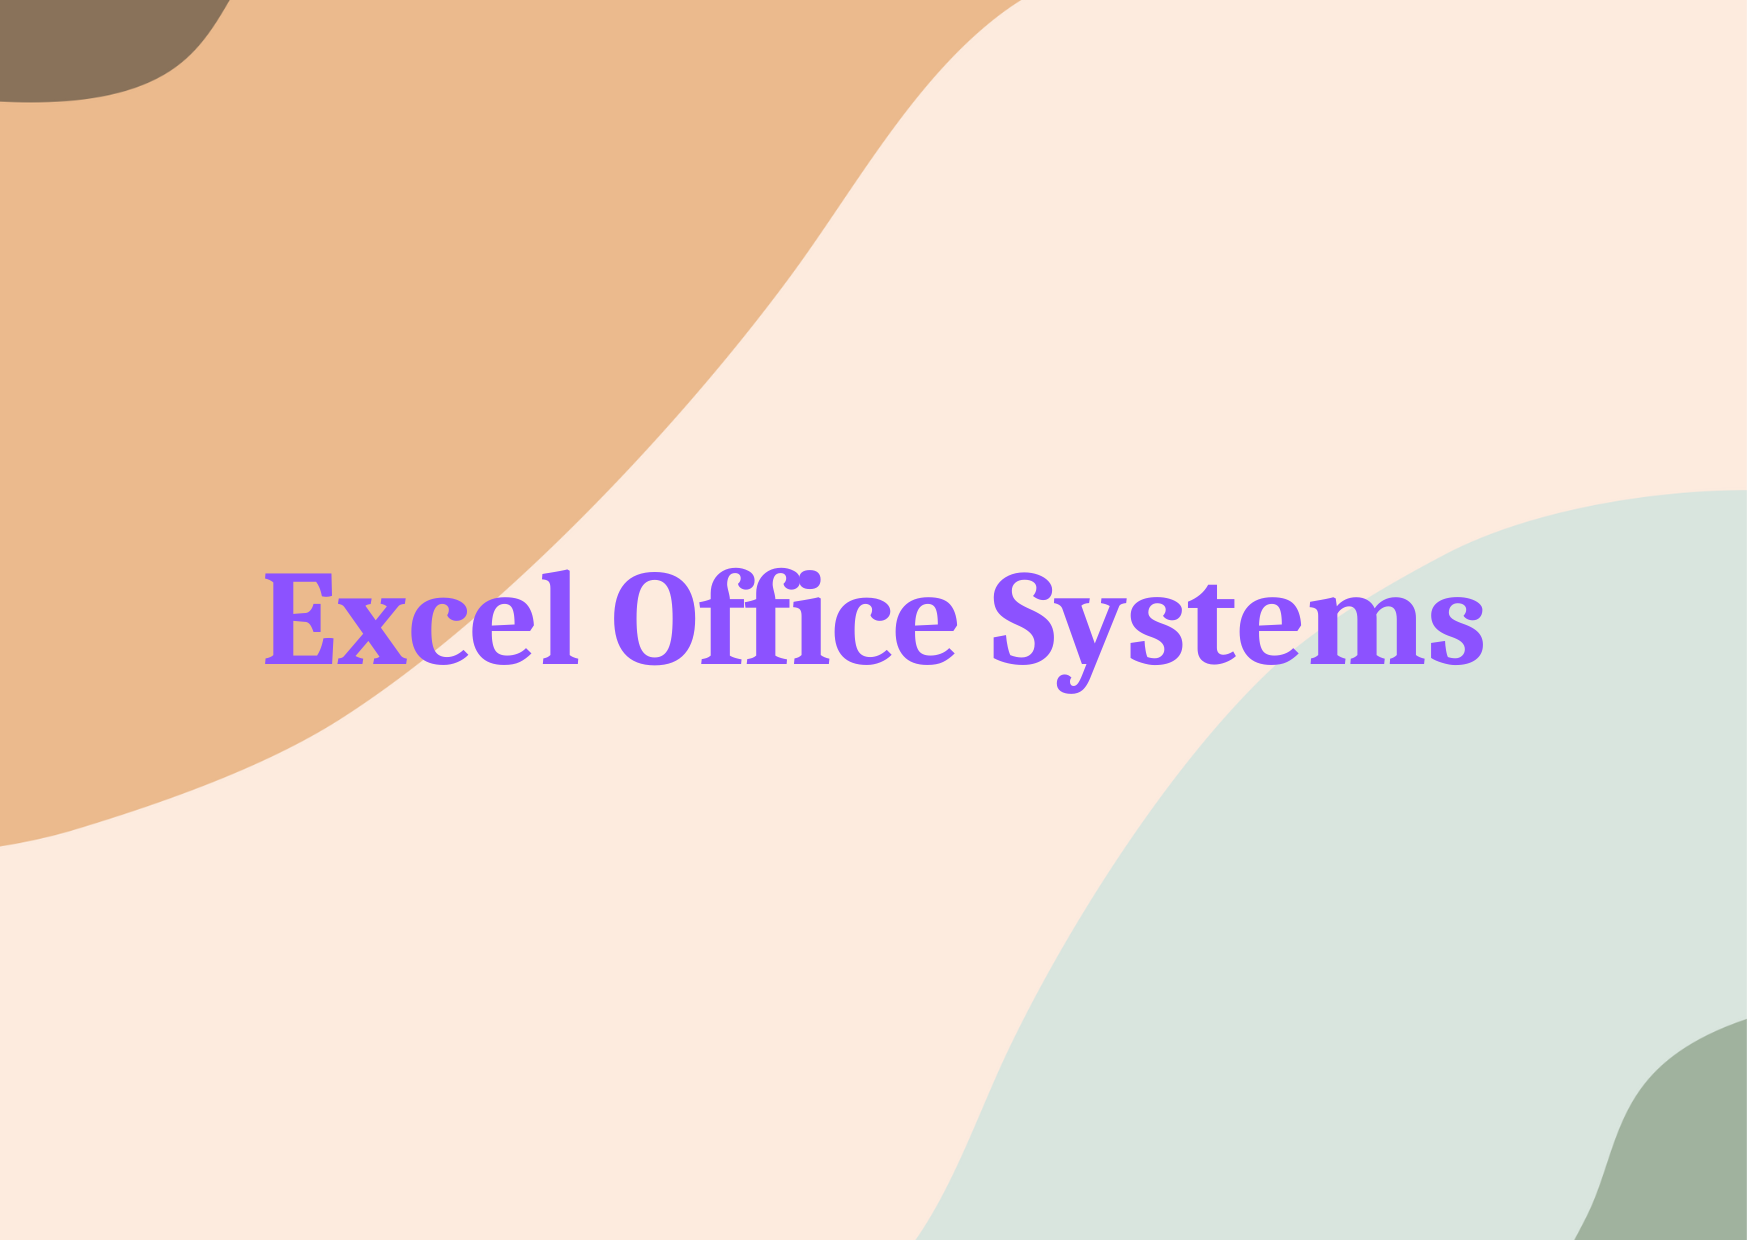  Excel Office Systems,   